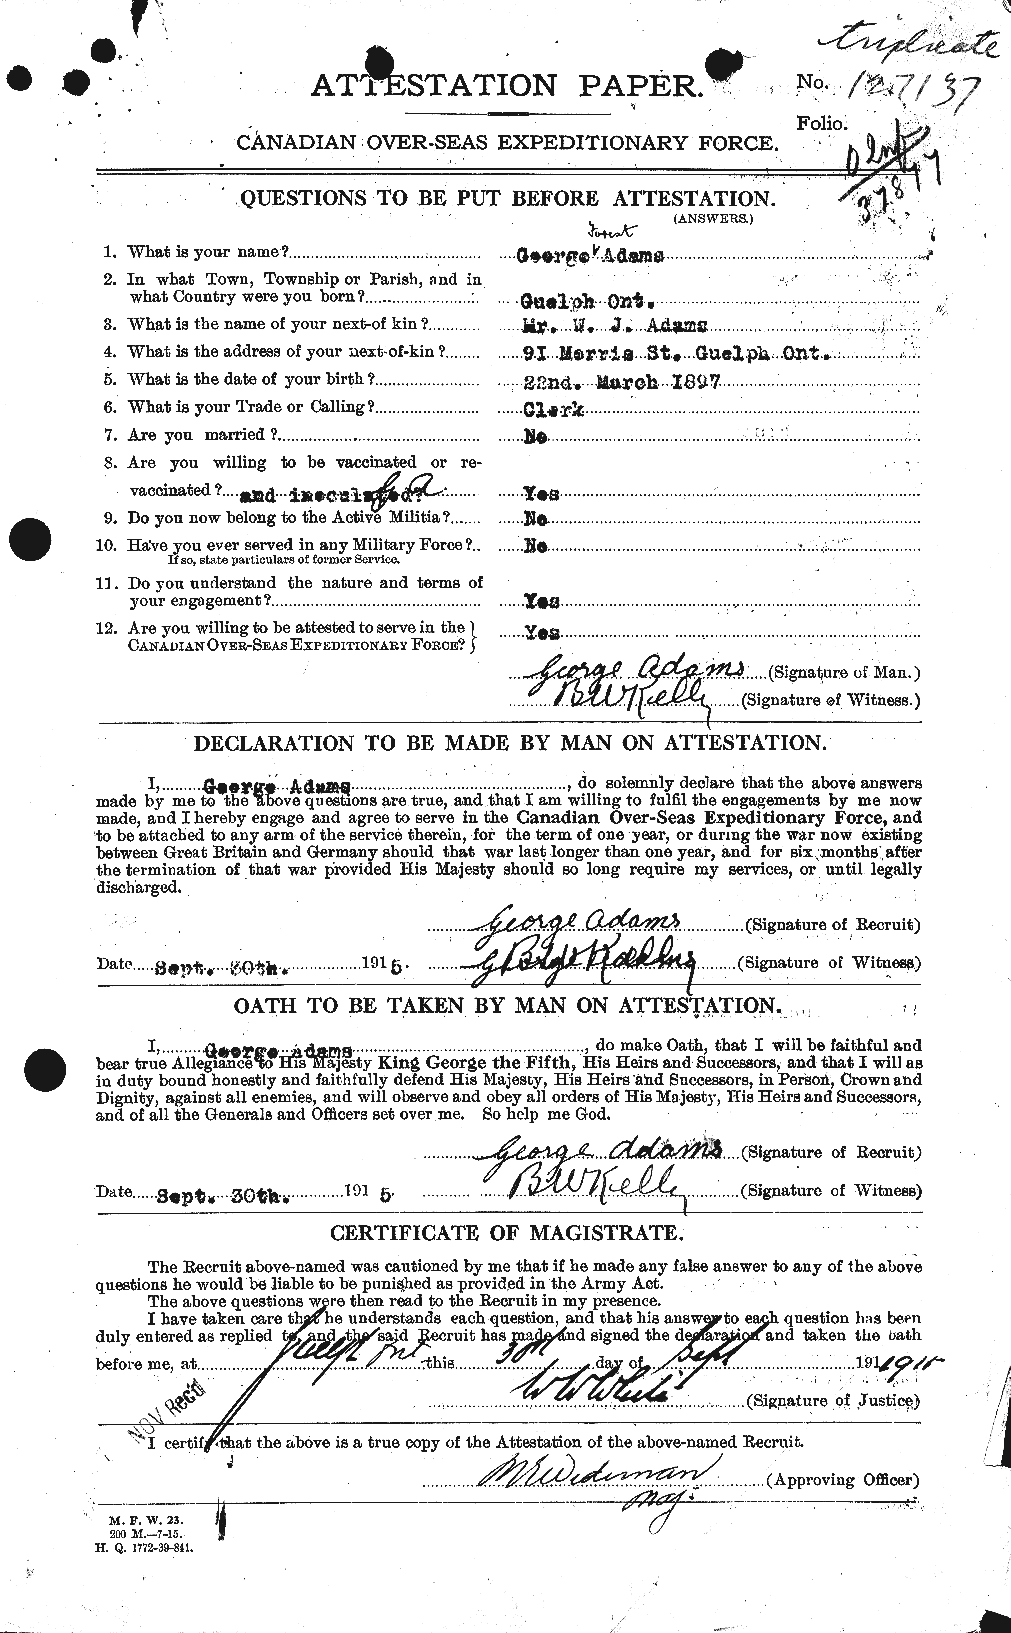 Personnel Records of the First World War - CEF 202557a